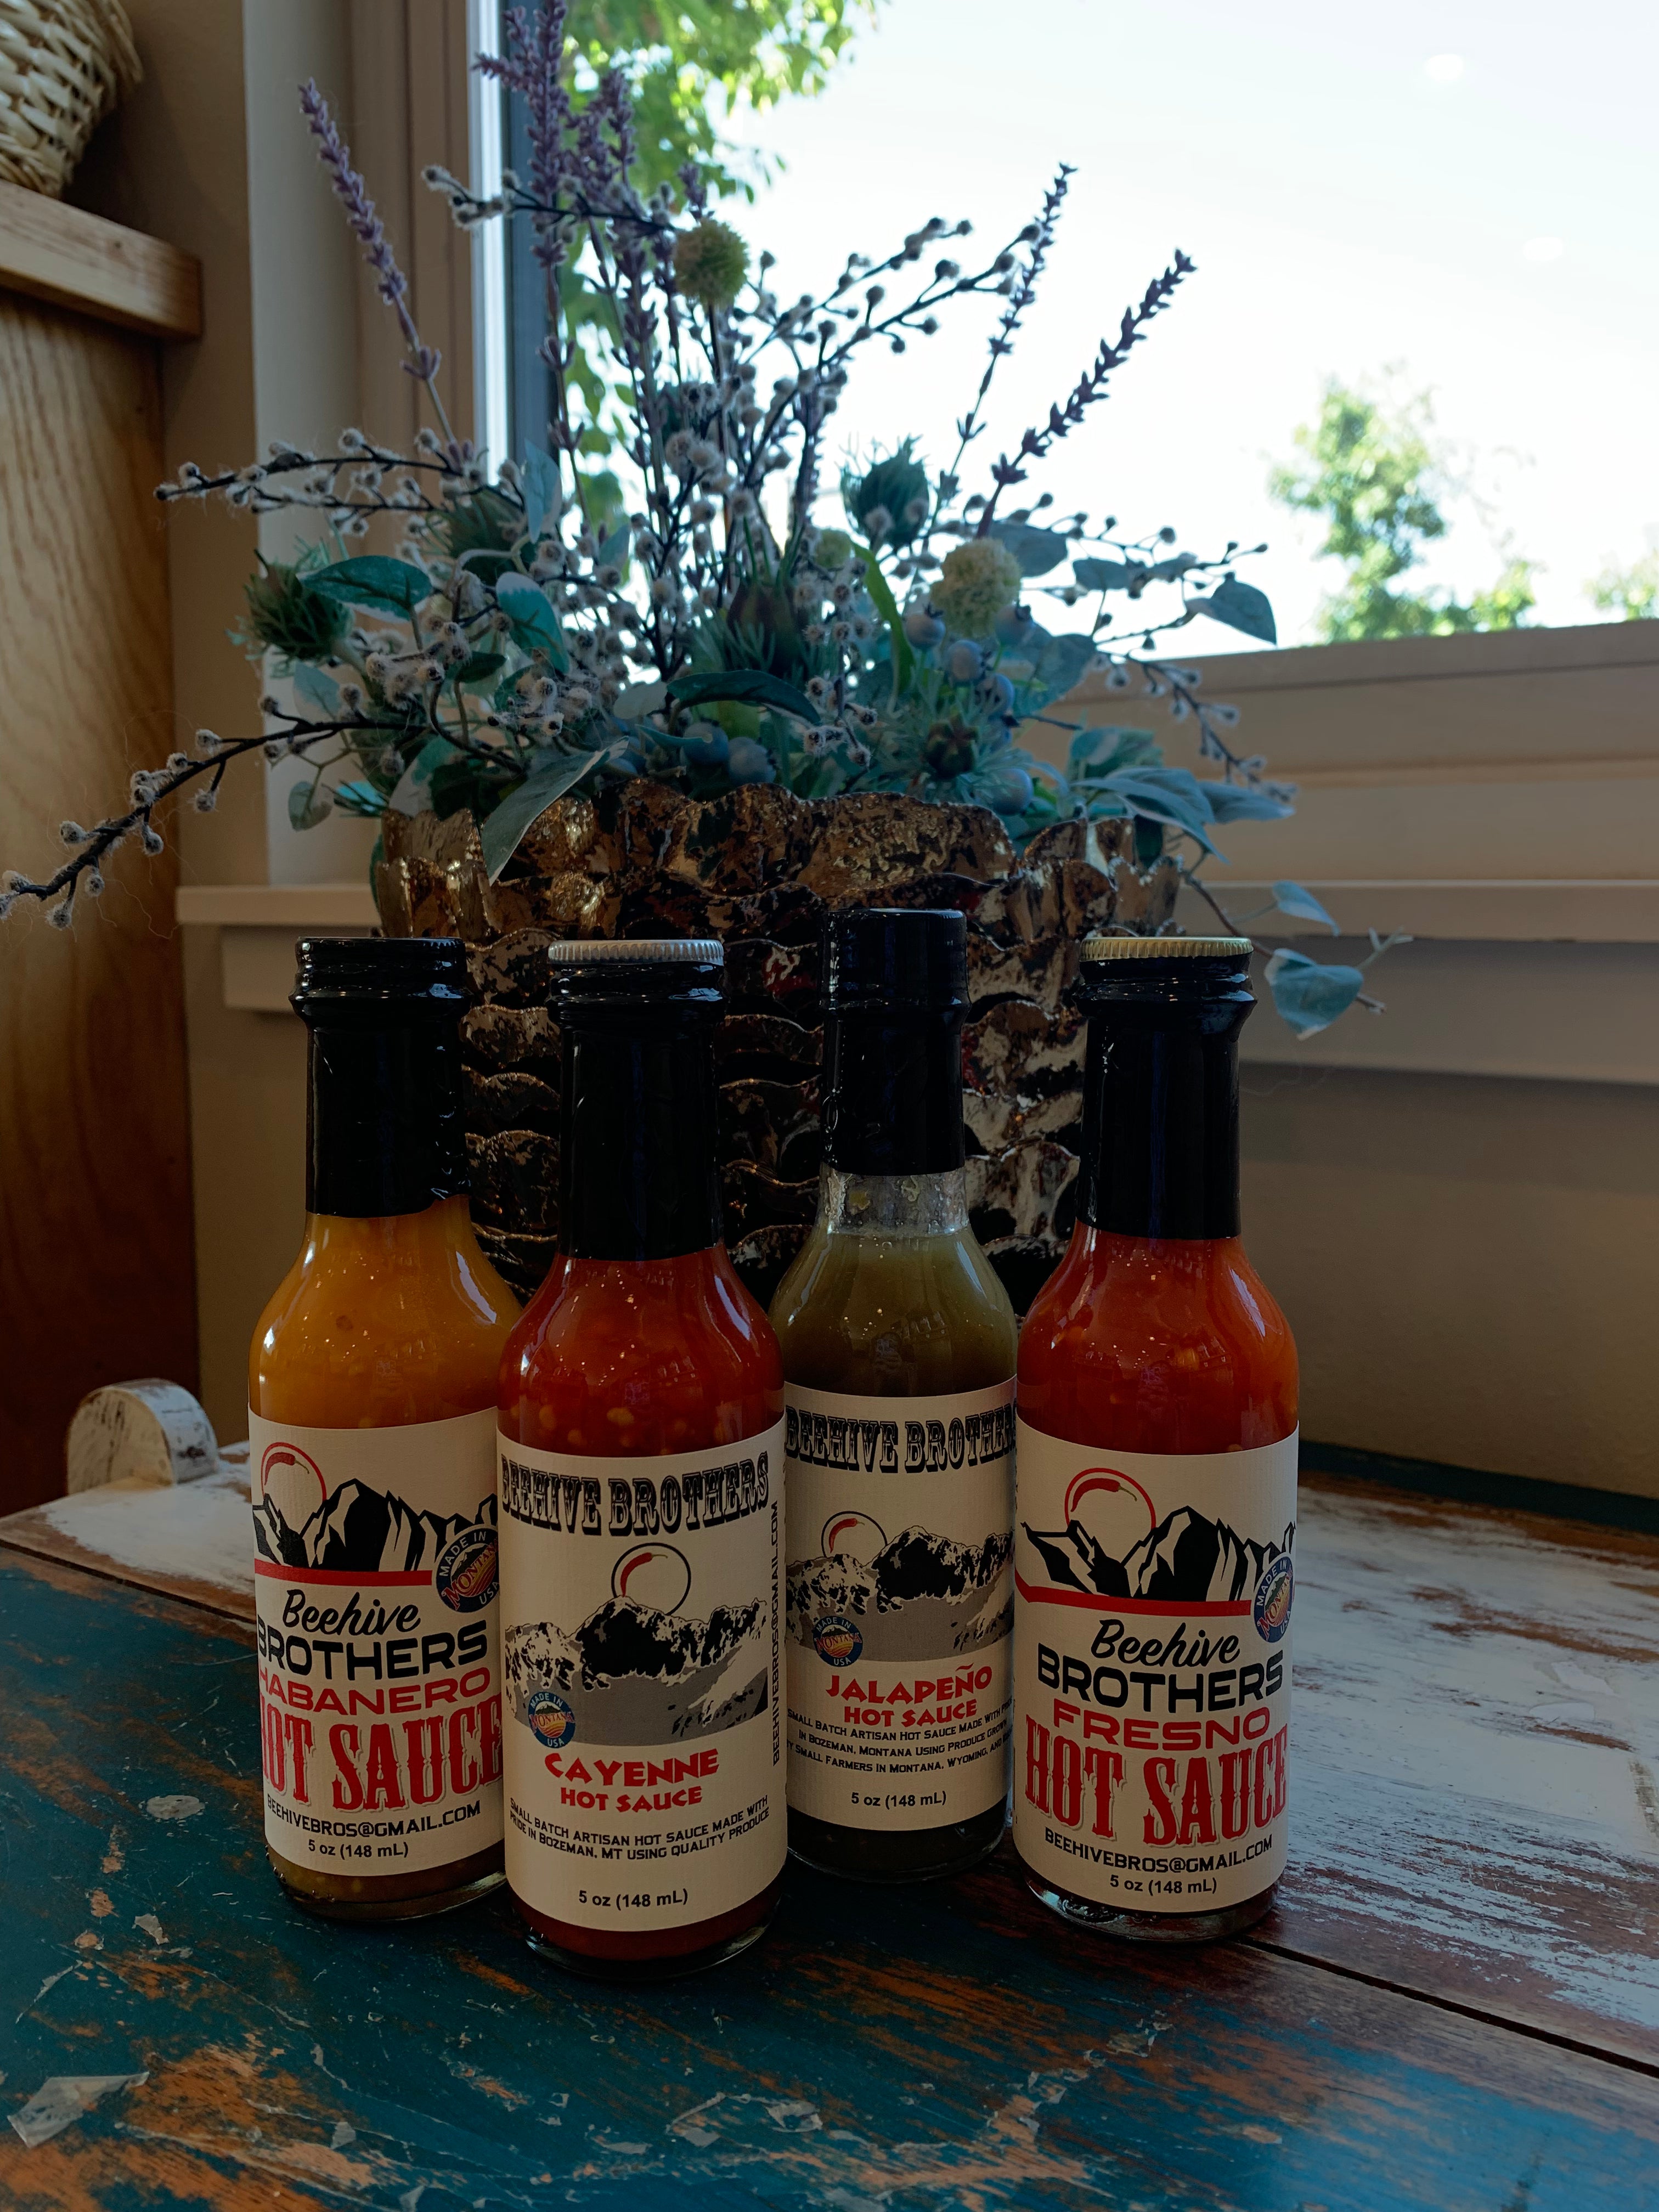 Beehive Brothers Hot Sauce